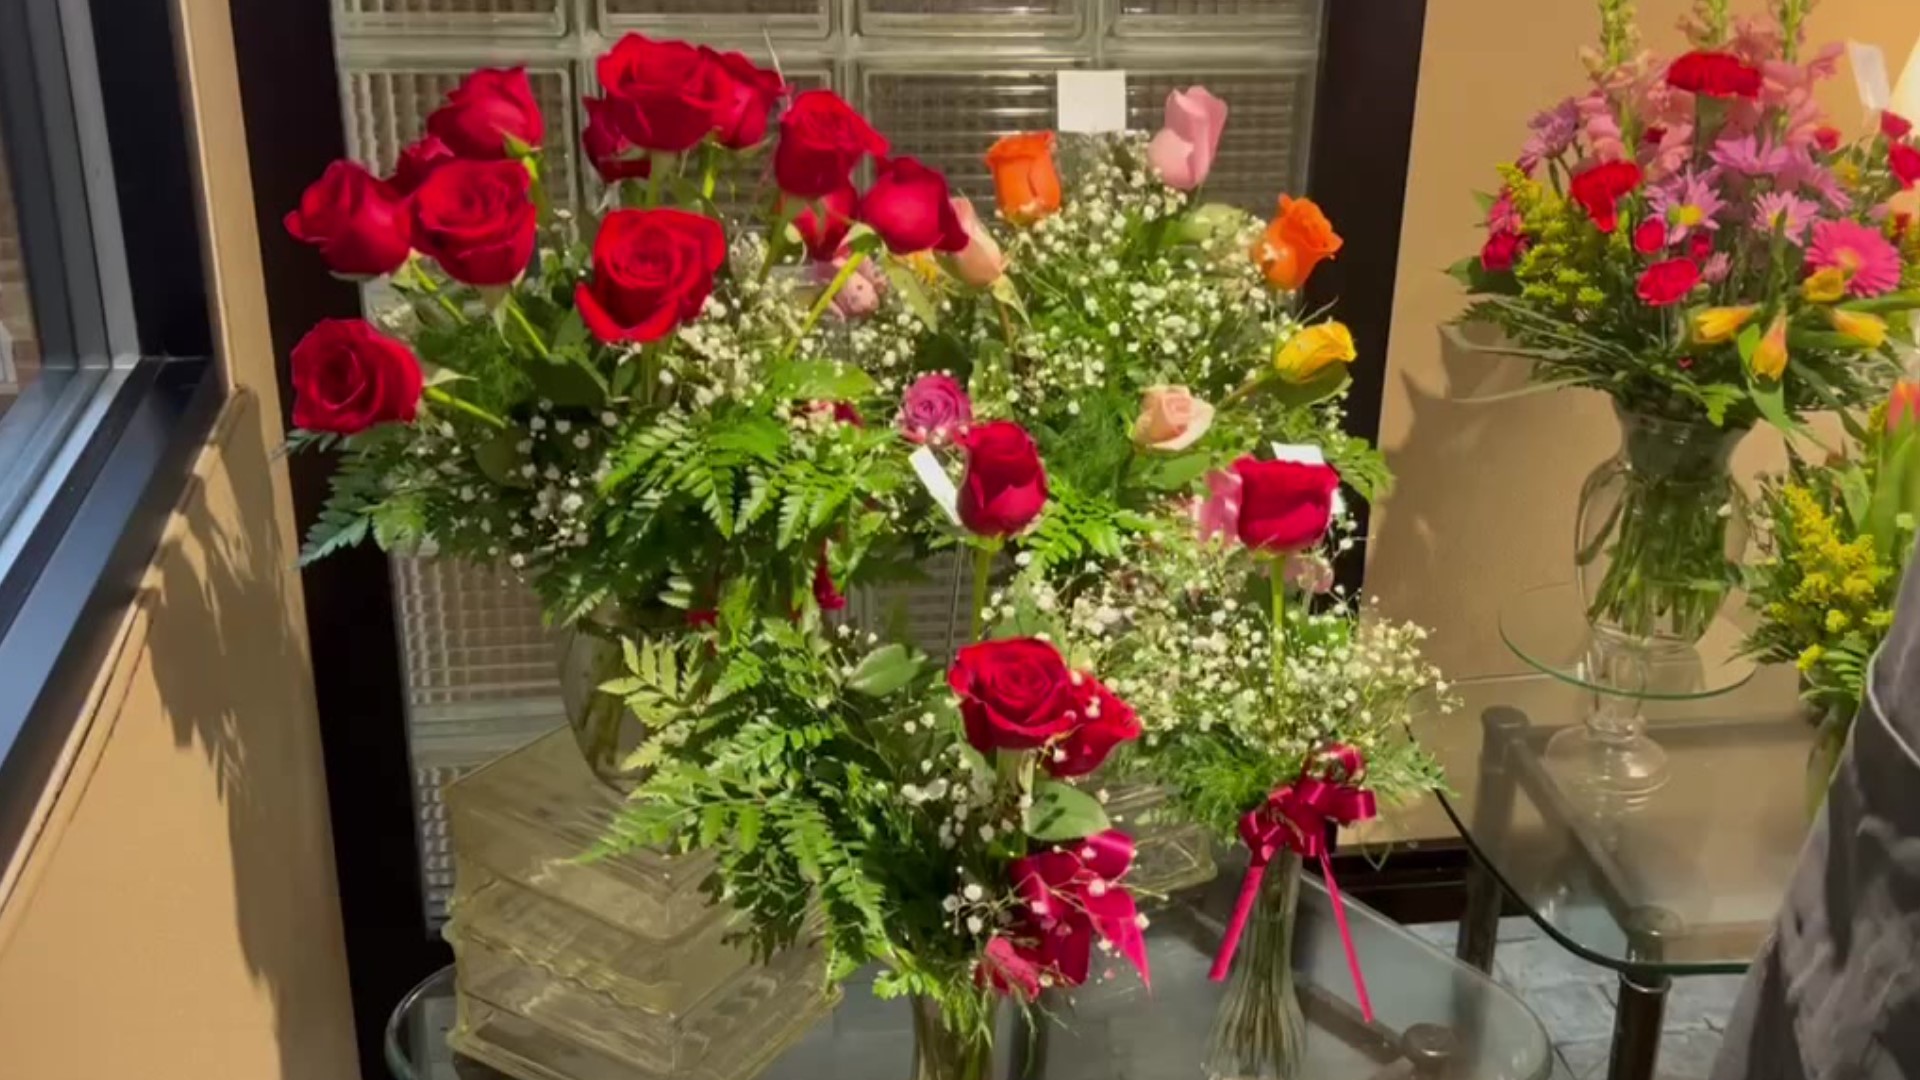 Valentine's Day is one of the busiest days of the year for flower shops.